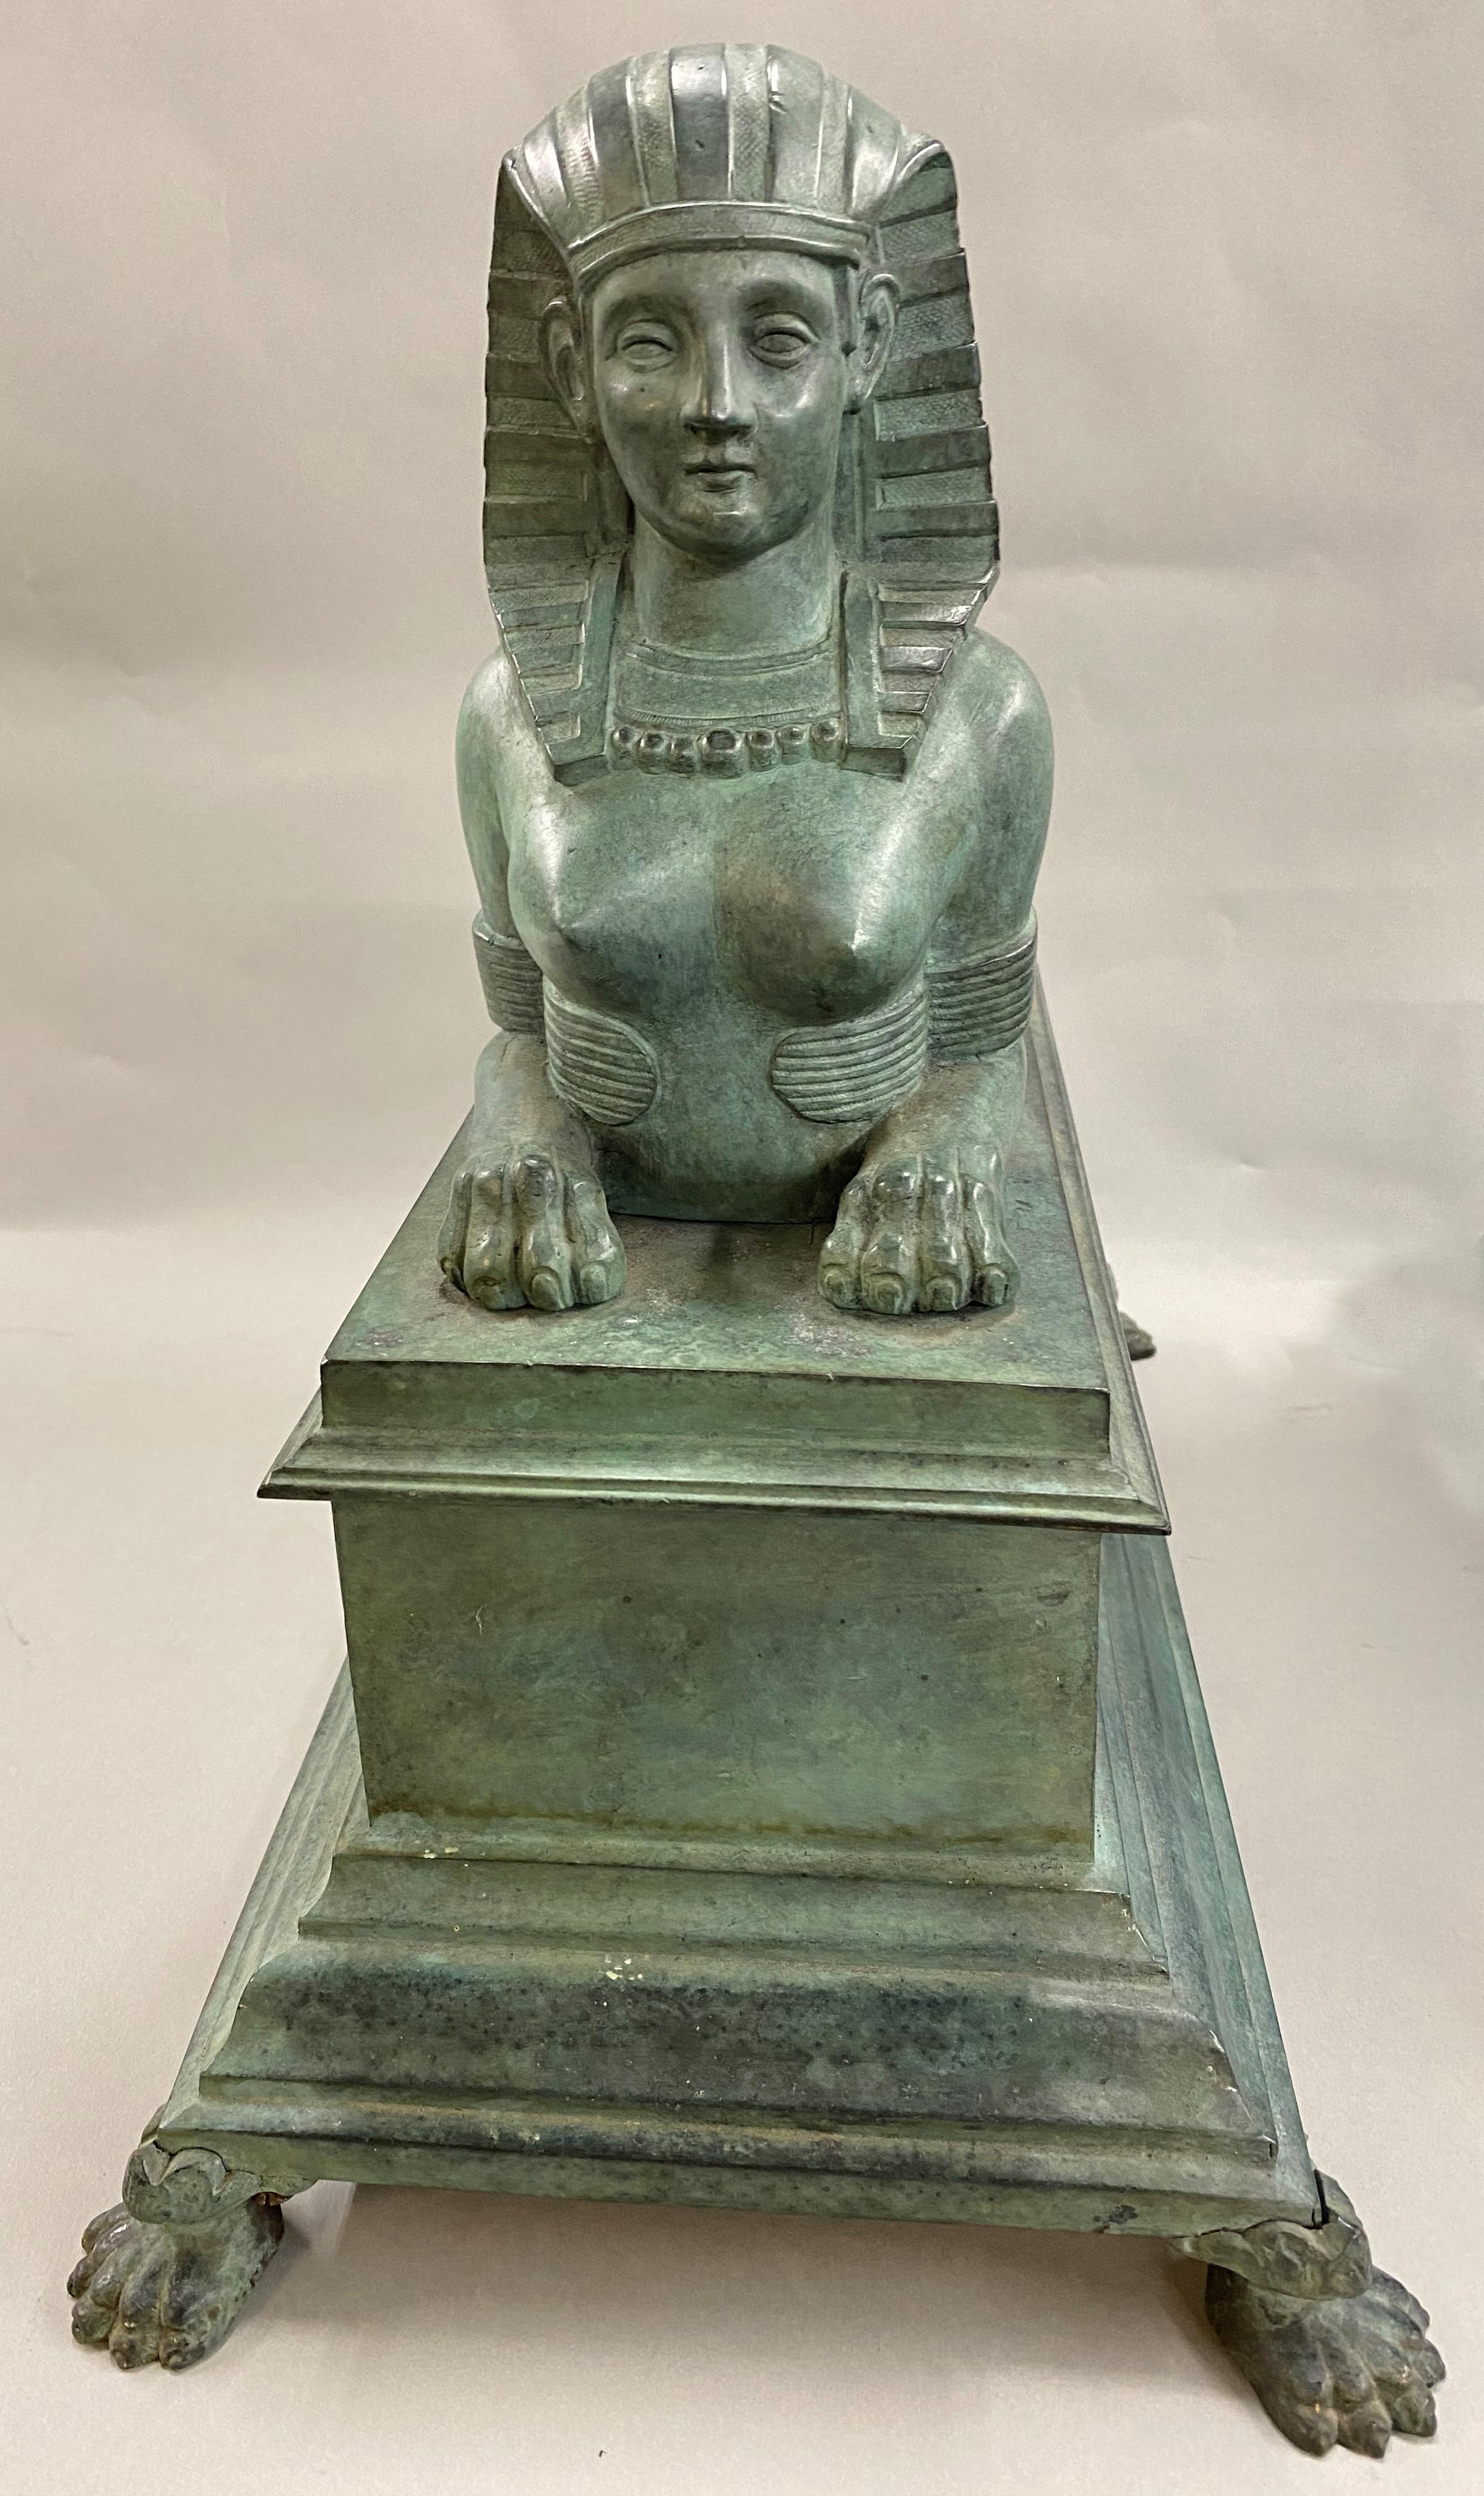 A fine quality pair of cast bronze Egyptian Revival sphinx on paw-foot bases, patinated in a green verdigris finish. Probably English in origin, circa 1900. Beautiful accent pieces for any living space. Very good overall condition, with minor